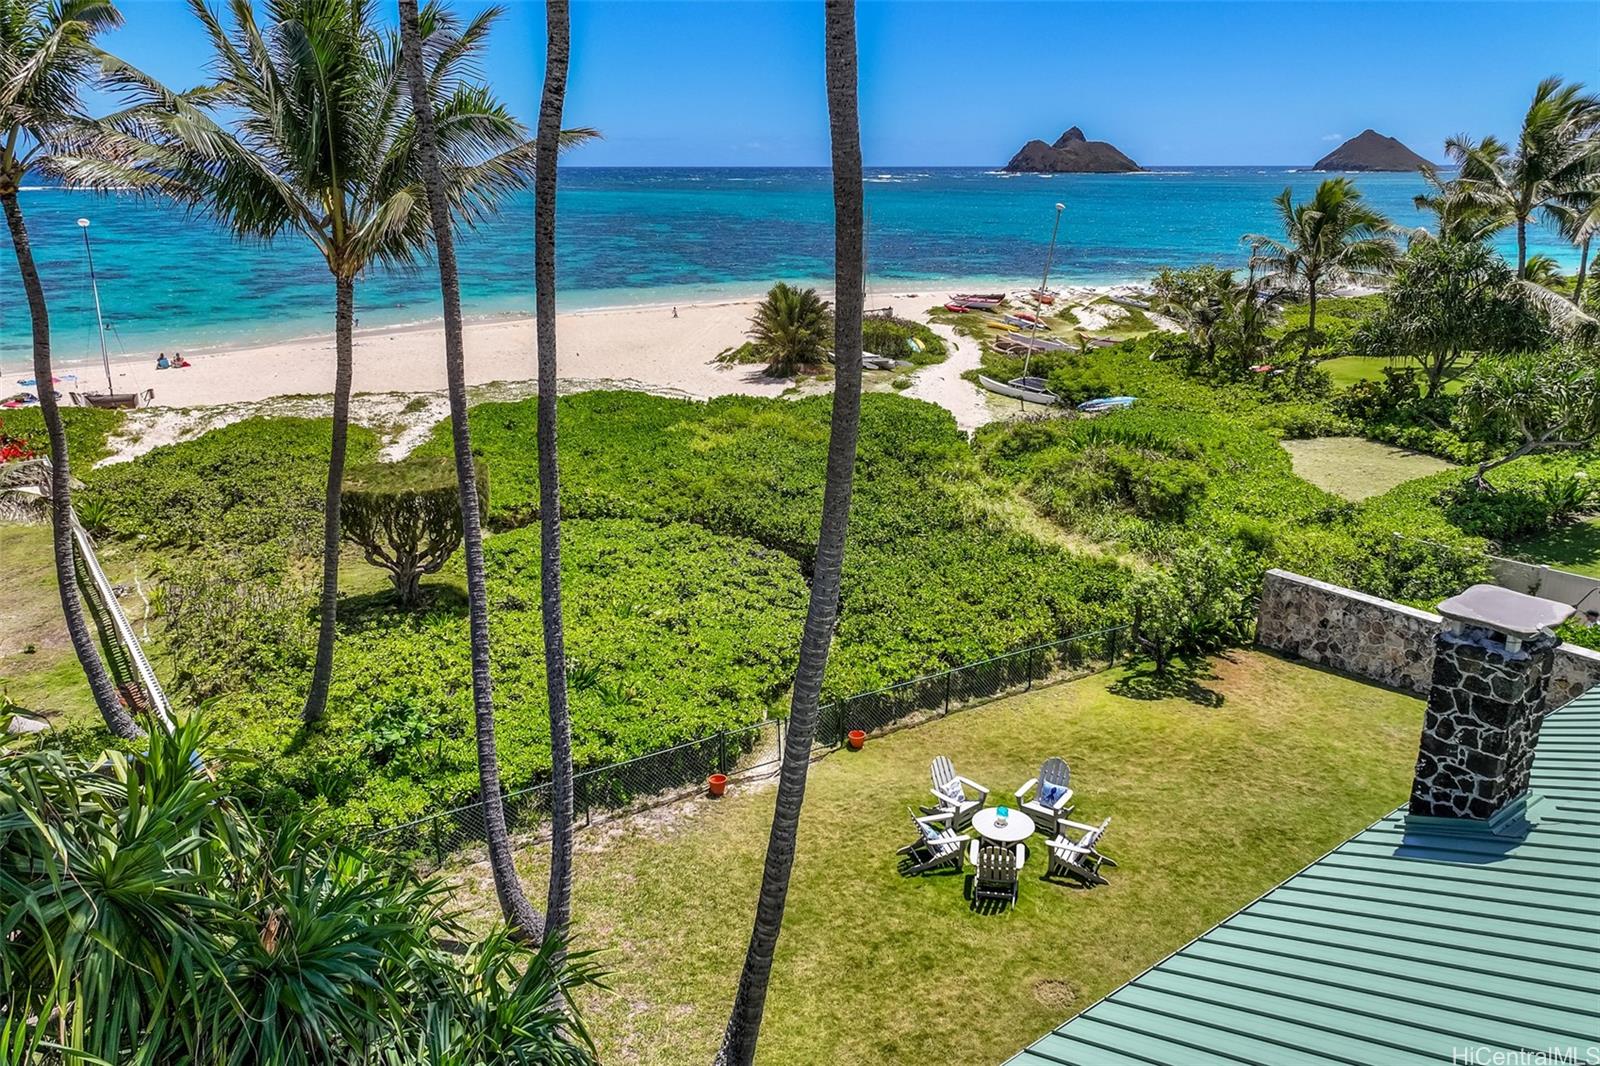 942 Mokulua Drive is located on the wide sandy part of Lanikai Beach.